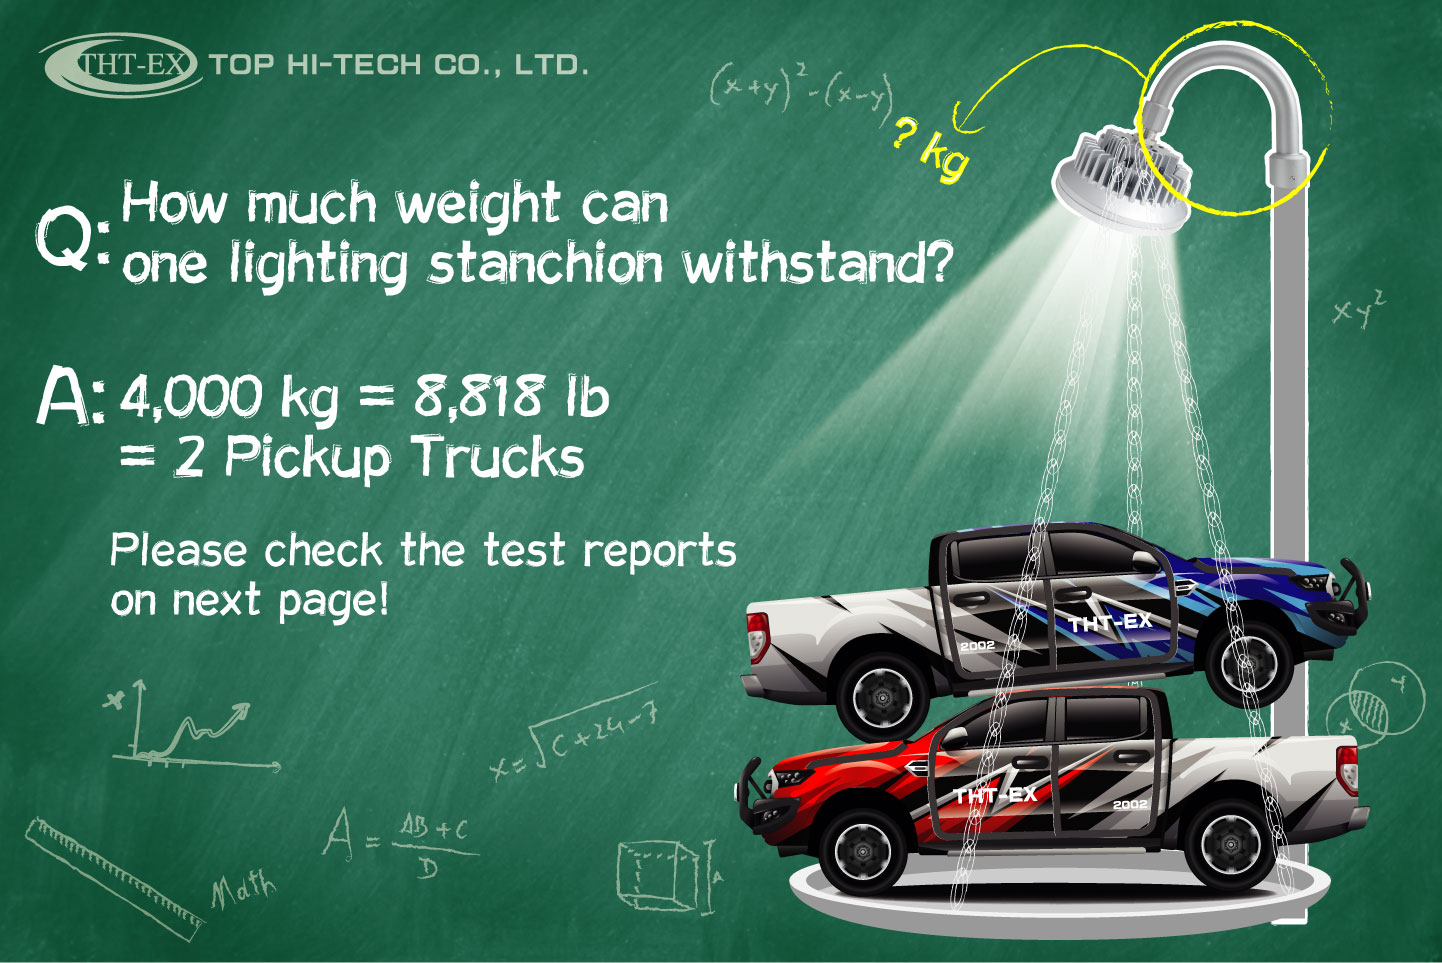 THT-EX Explosion Proof LED Lighting can withstand a load of 4,000 kg (8,818 lb)!